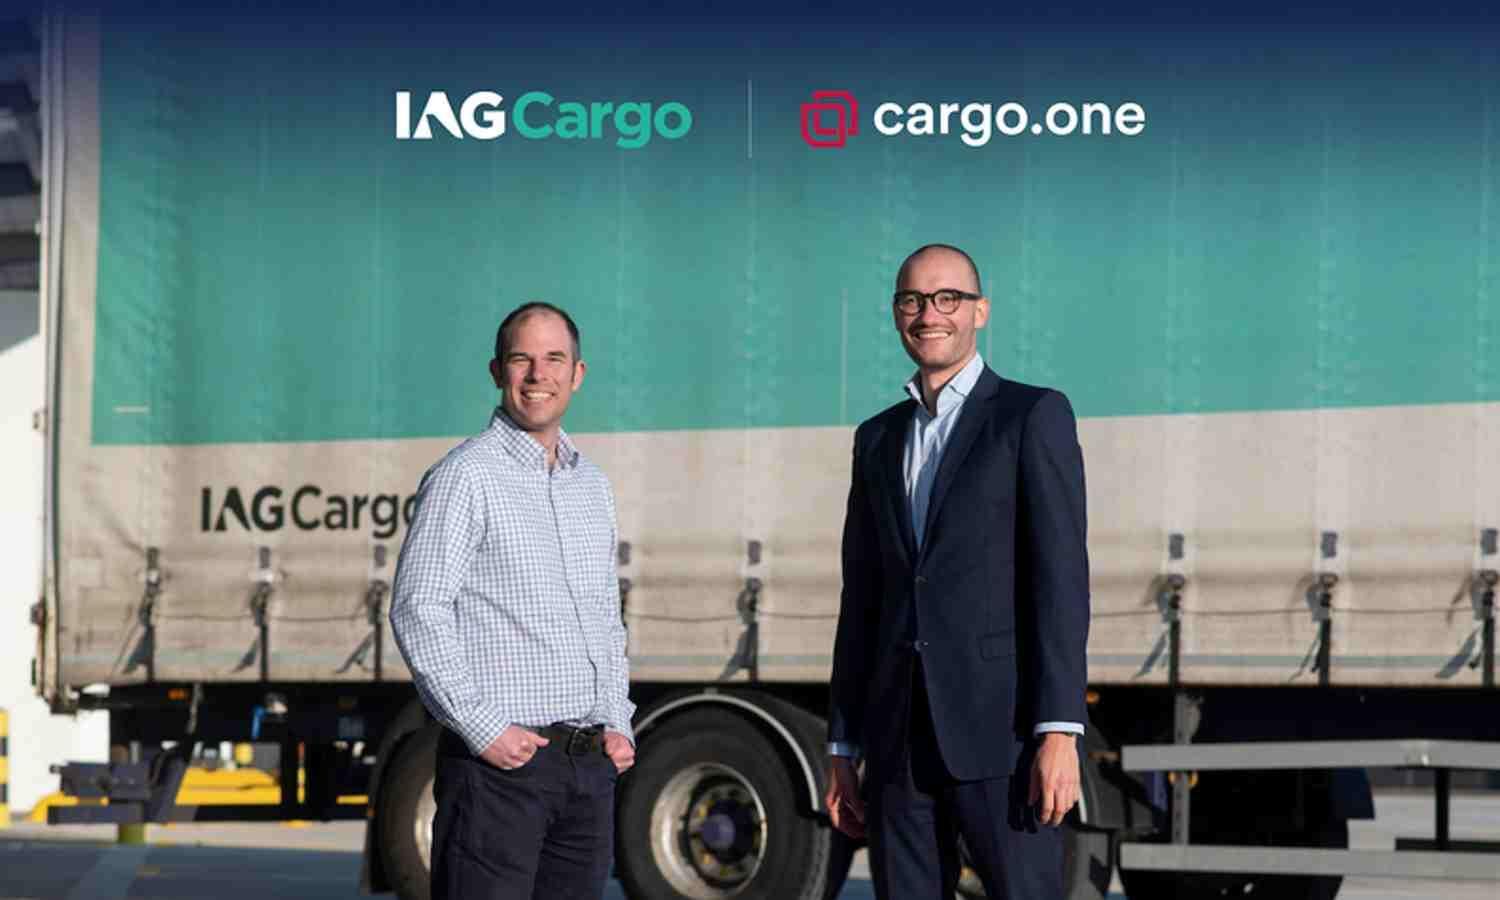 IAG Cargo expands digital presence; partners with cargo.one